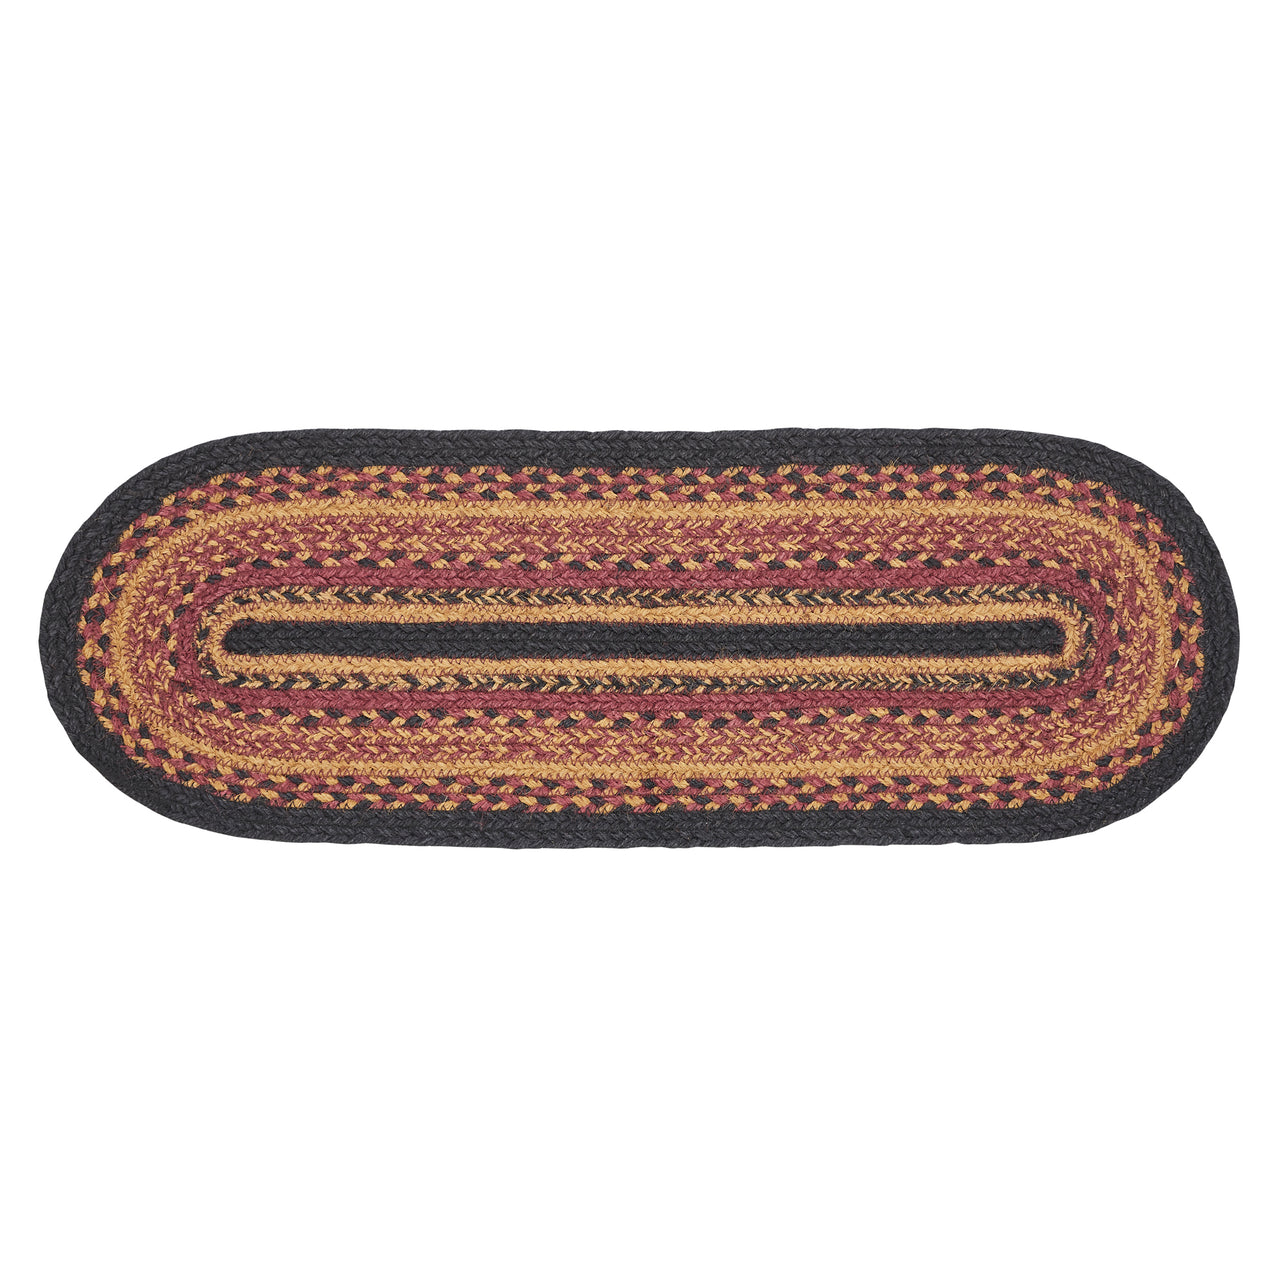 Heritage Farms Jute Oval Runner 8x24 VHC Brands